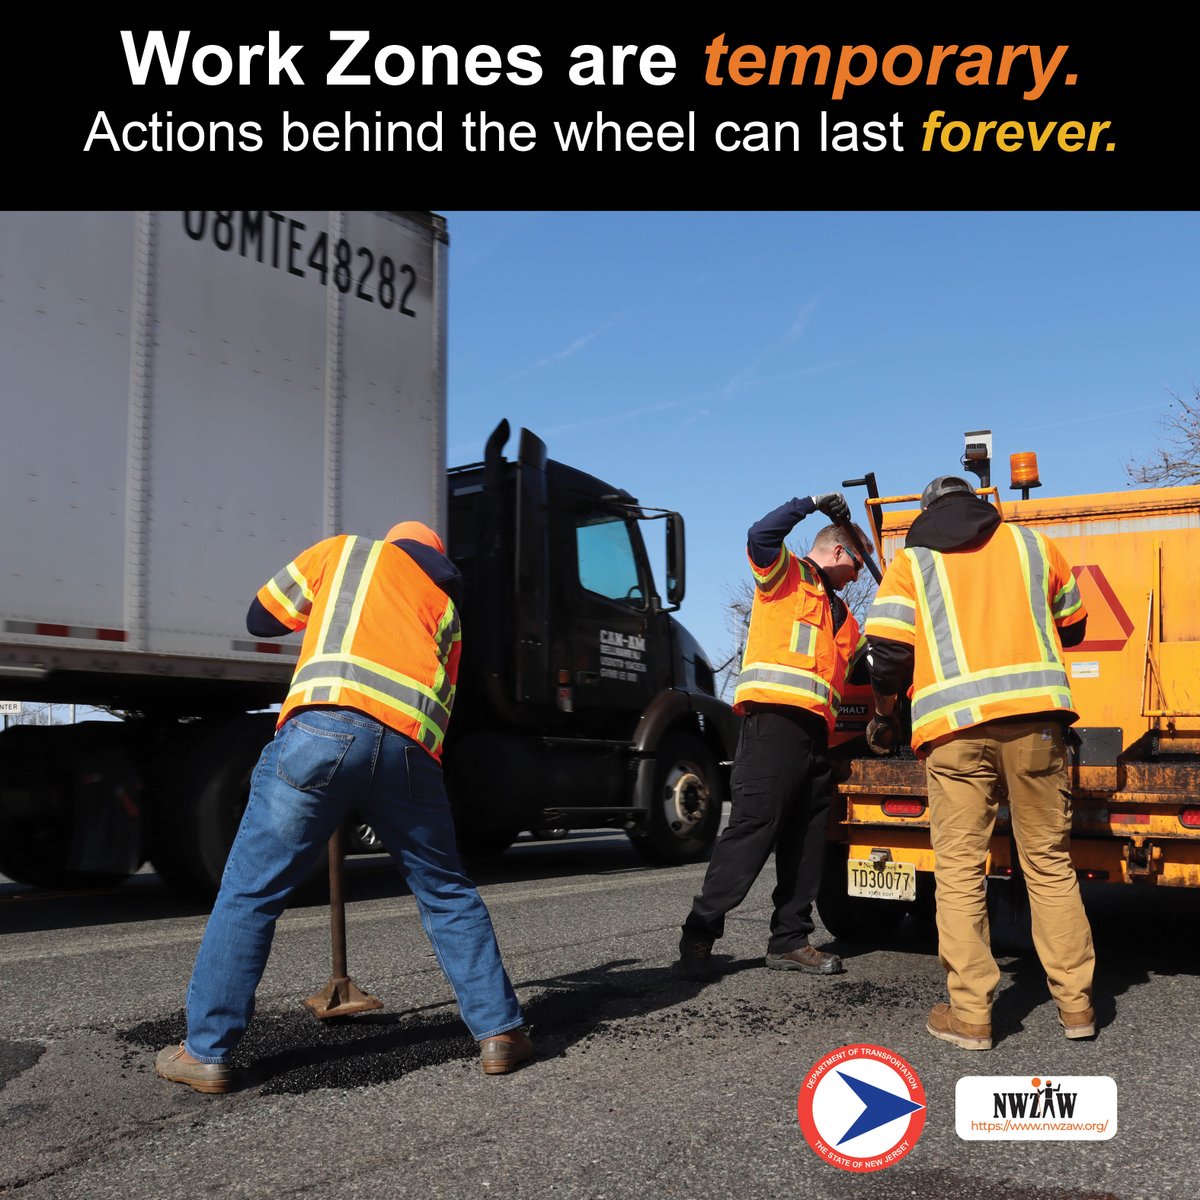 🦺 Picture your mother, brother, wife, or friend working on the roadway. Would you slow down so they can work safely? Now apply that same caution to all road workers because they are someone’s family and deserve to go home. #NWZAW24